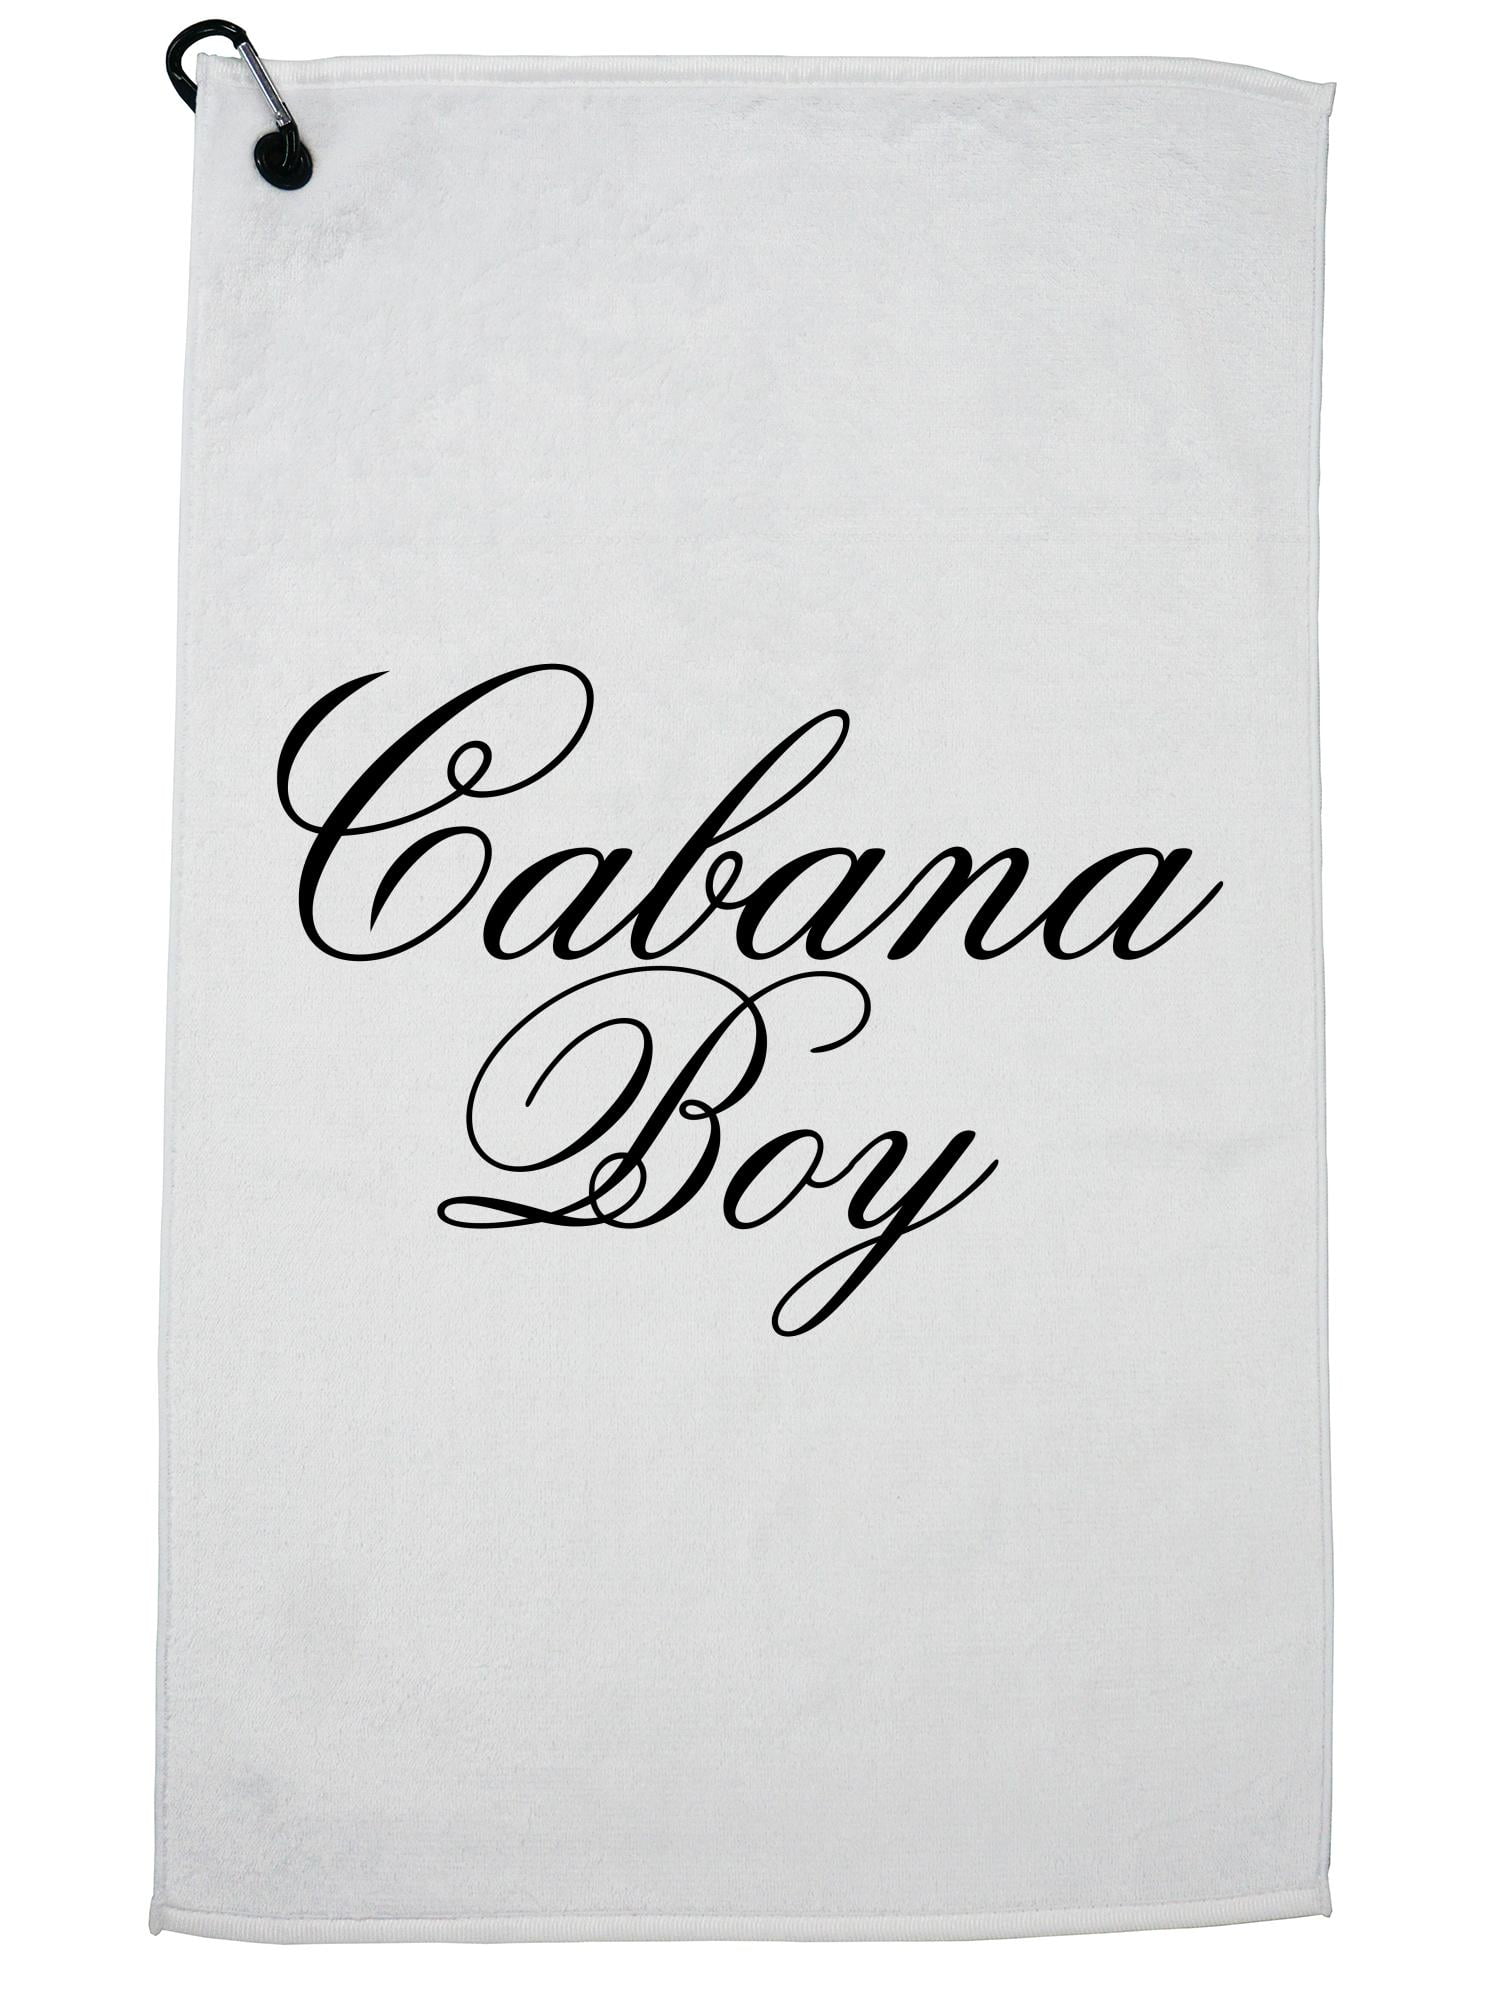 Hilarious and Classic Cabana Boy Graphic Golf Towel with Carabiner Clip